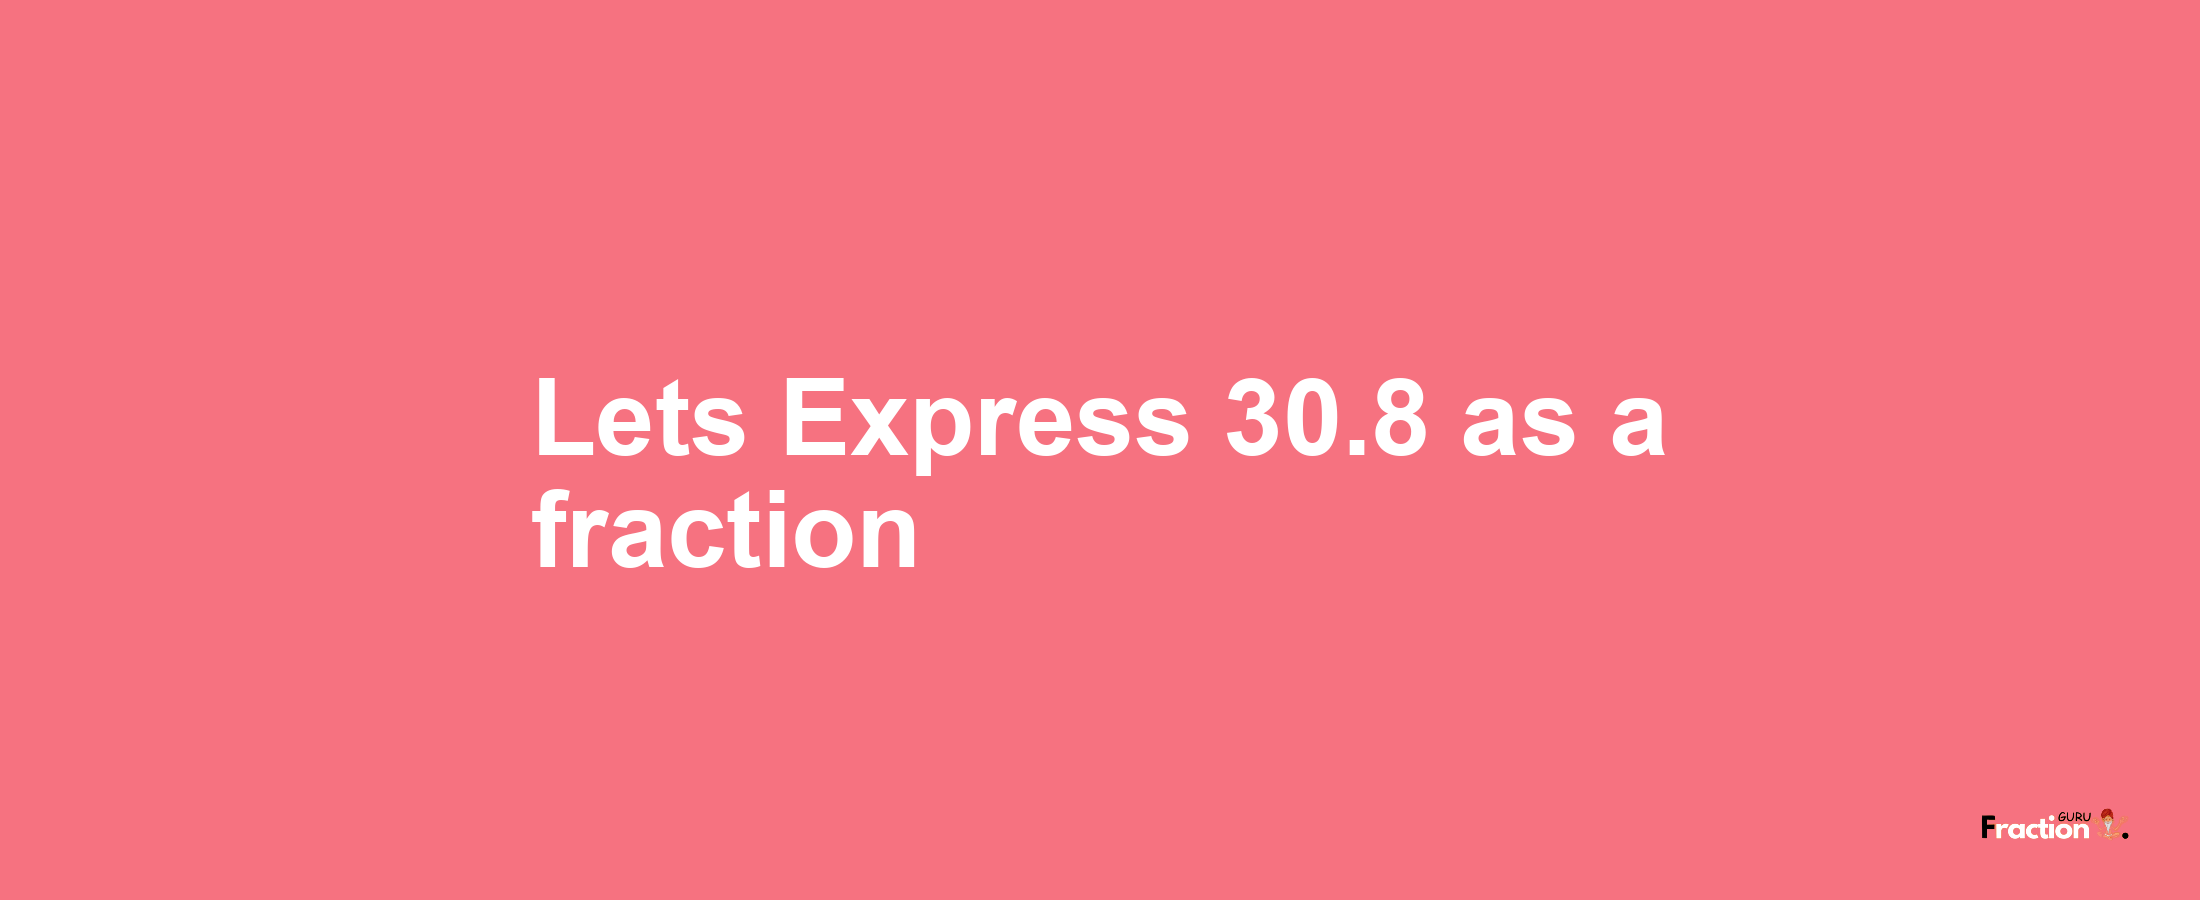 Lets Express 30.8 as afraction